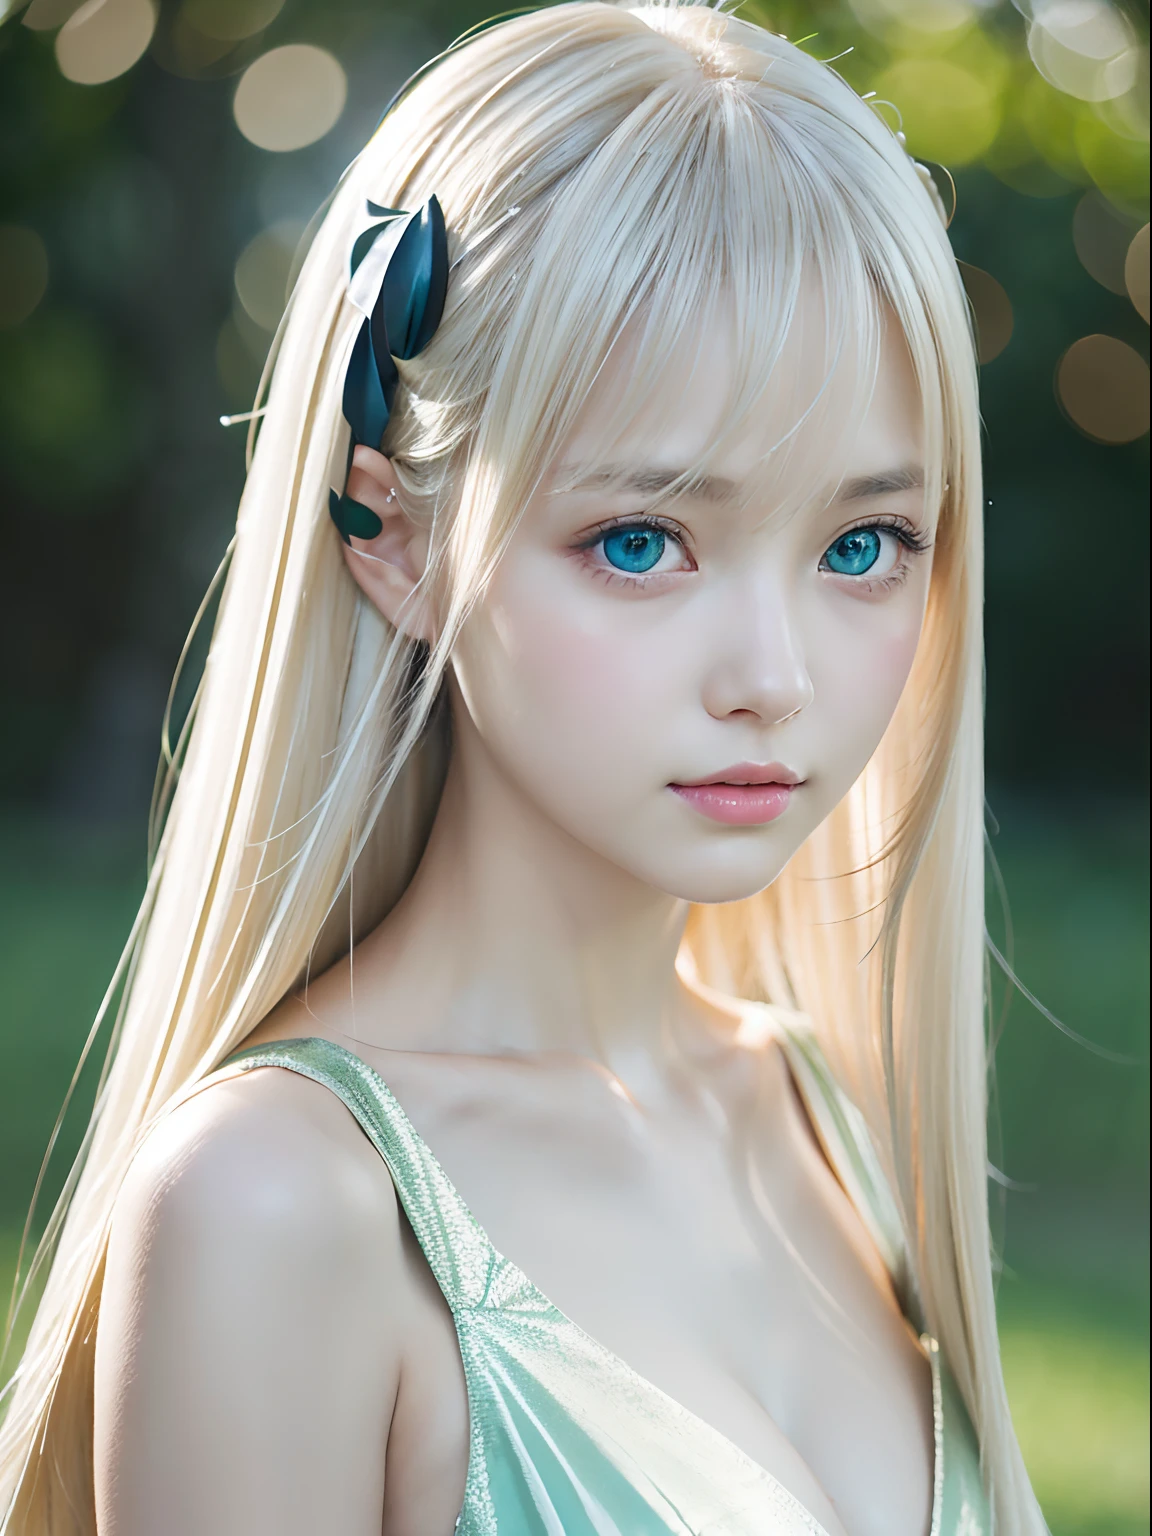 masutepiece, Best Quality, Photorealsitic, Ultra-detailed, finely detail, hight resolution, 8k wallpaper, RAW color photo, Professional, high level of detail, 13-year-old beautiful girl、Very cute face、((Dazzling platinum blonde super long straight silky hair)) long bangs between eyes、Pretty Face、foco nítido, awardwinning photo, (Emerald green dress), (cleavage of the breast), (Facing the front), (Look at viewers), Small light, Low contrast, Facial symmetry, depth of fields, Cinematic background, central image, Lights up softly, (finely detailed skin), White-colored skin, glowy skin、Gloss Face、Teak Gloss、Realistic skin texture, Extreme skin details、Bright pale marine blue eyes、Small face beauty、big eye、with round face、Young features、